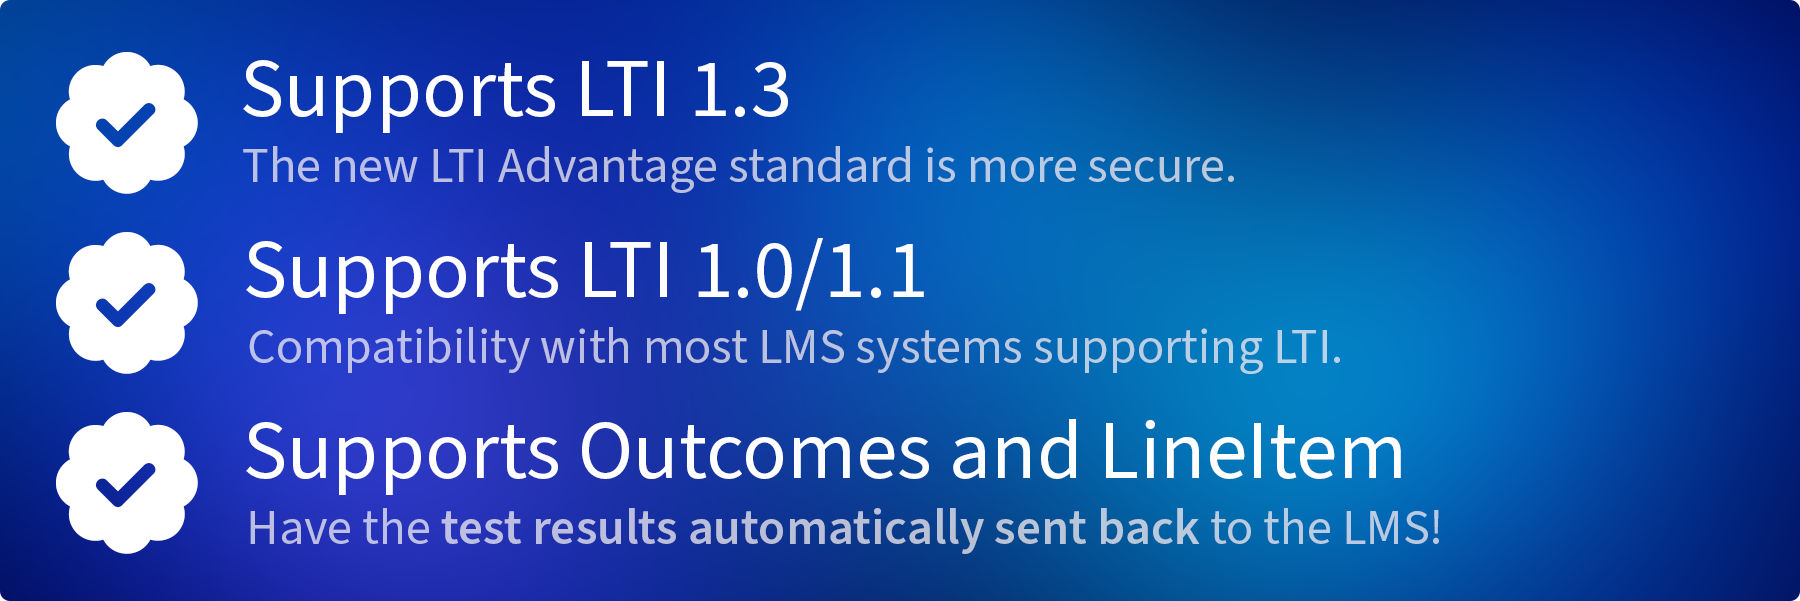 LTI 1.0/1.1/1.3 integration with Outcomes and LineItem support